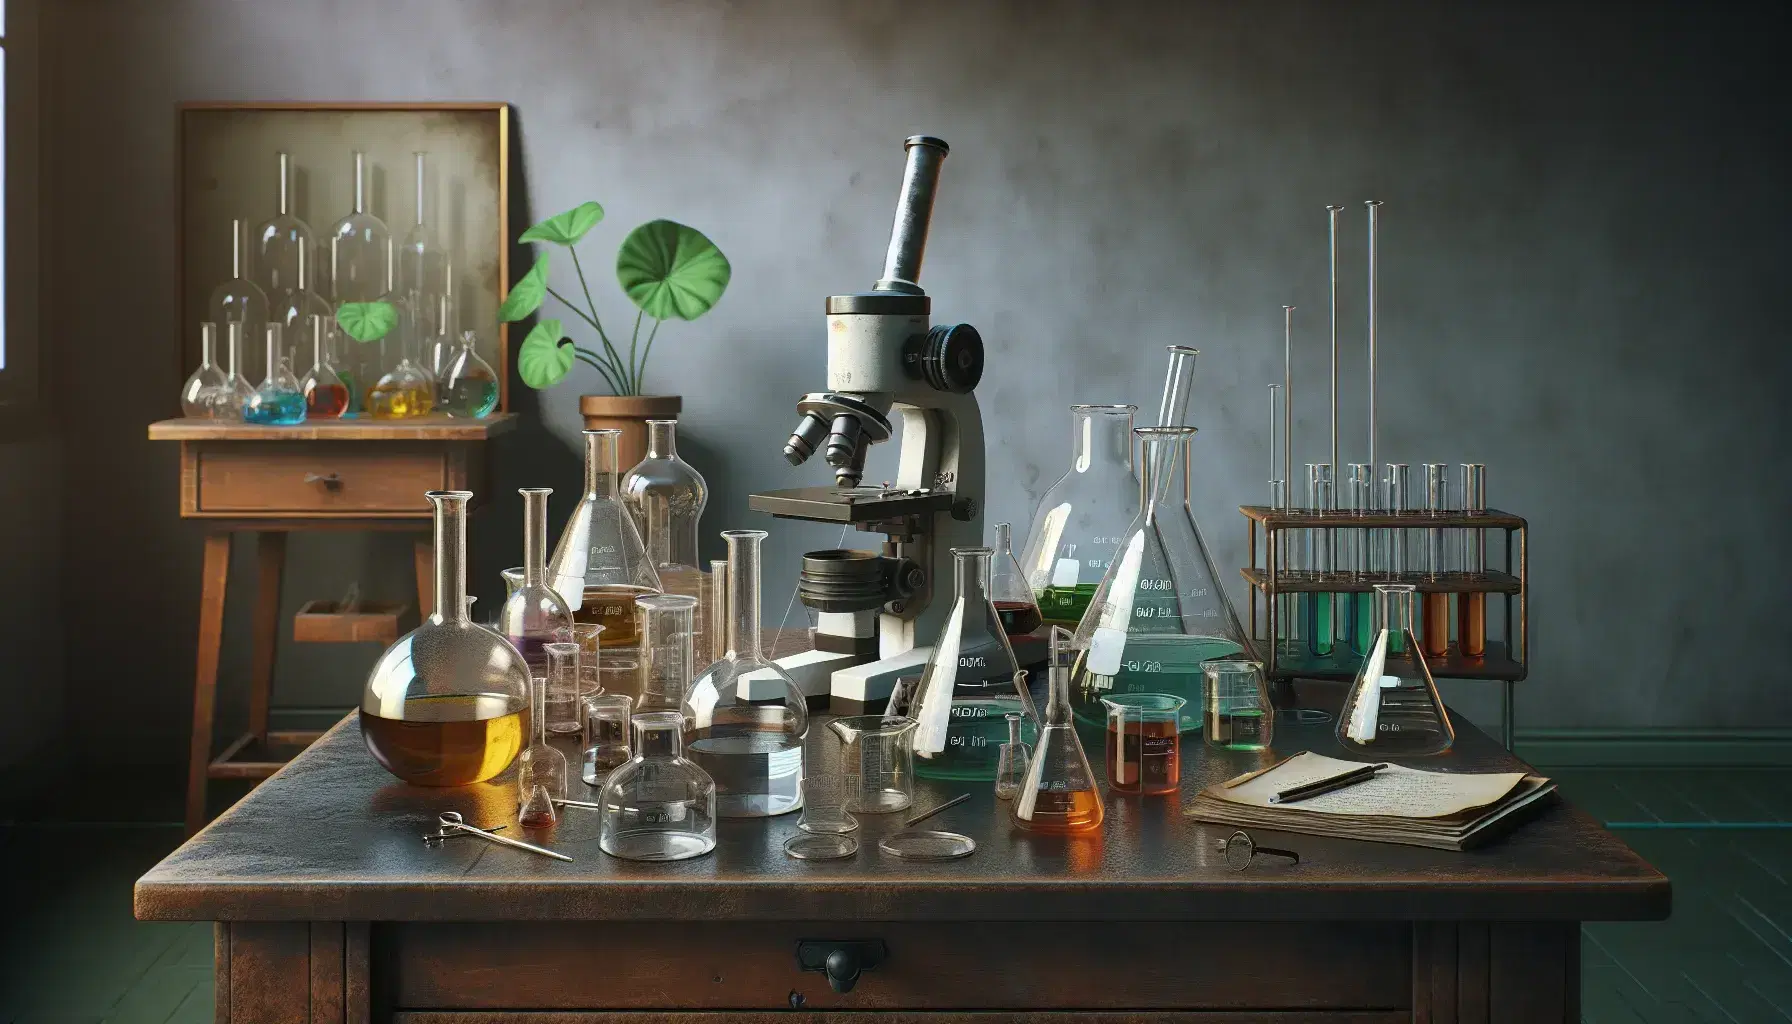 Messy laboratory with wooden table, test tubes full of colored liquids, microscope, green plant and hanging lab coat.